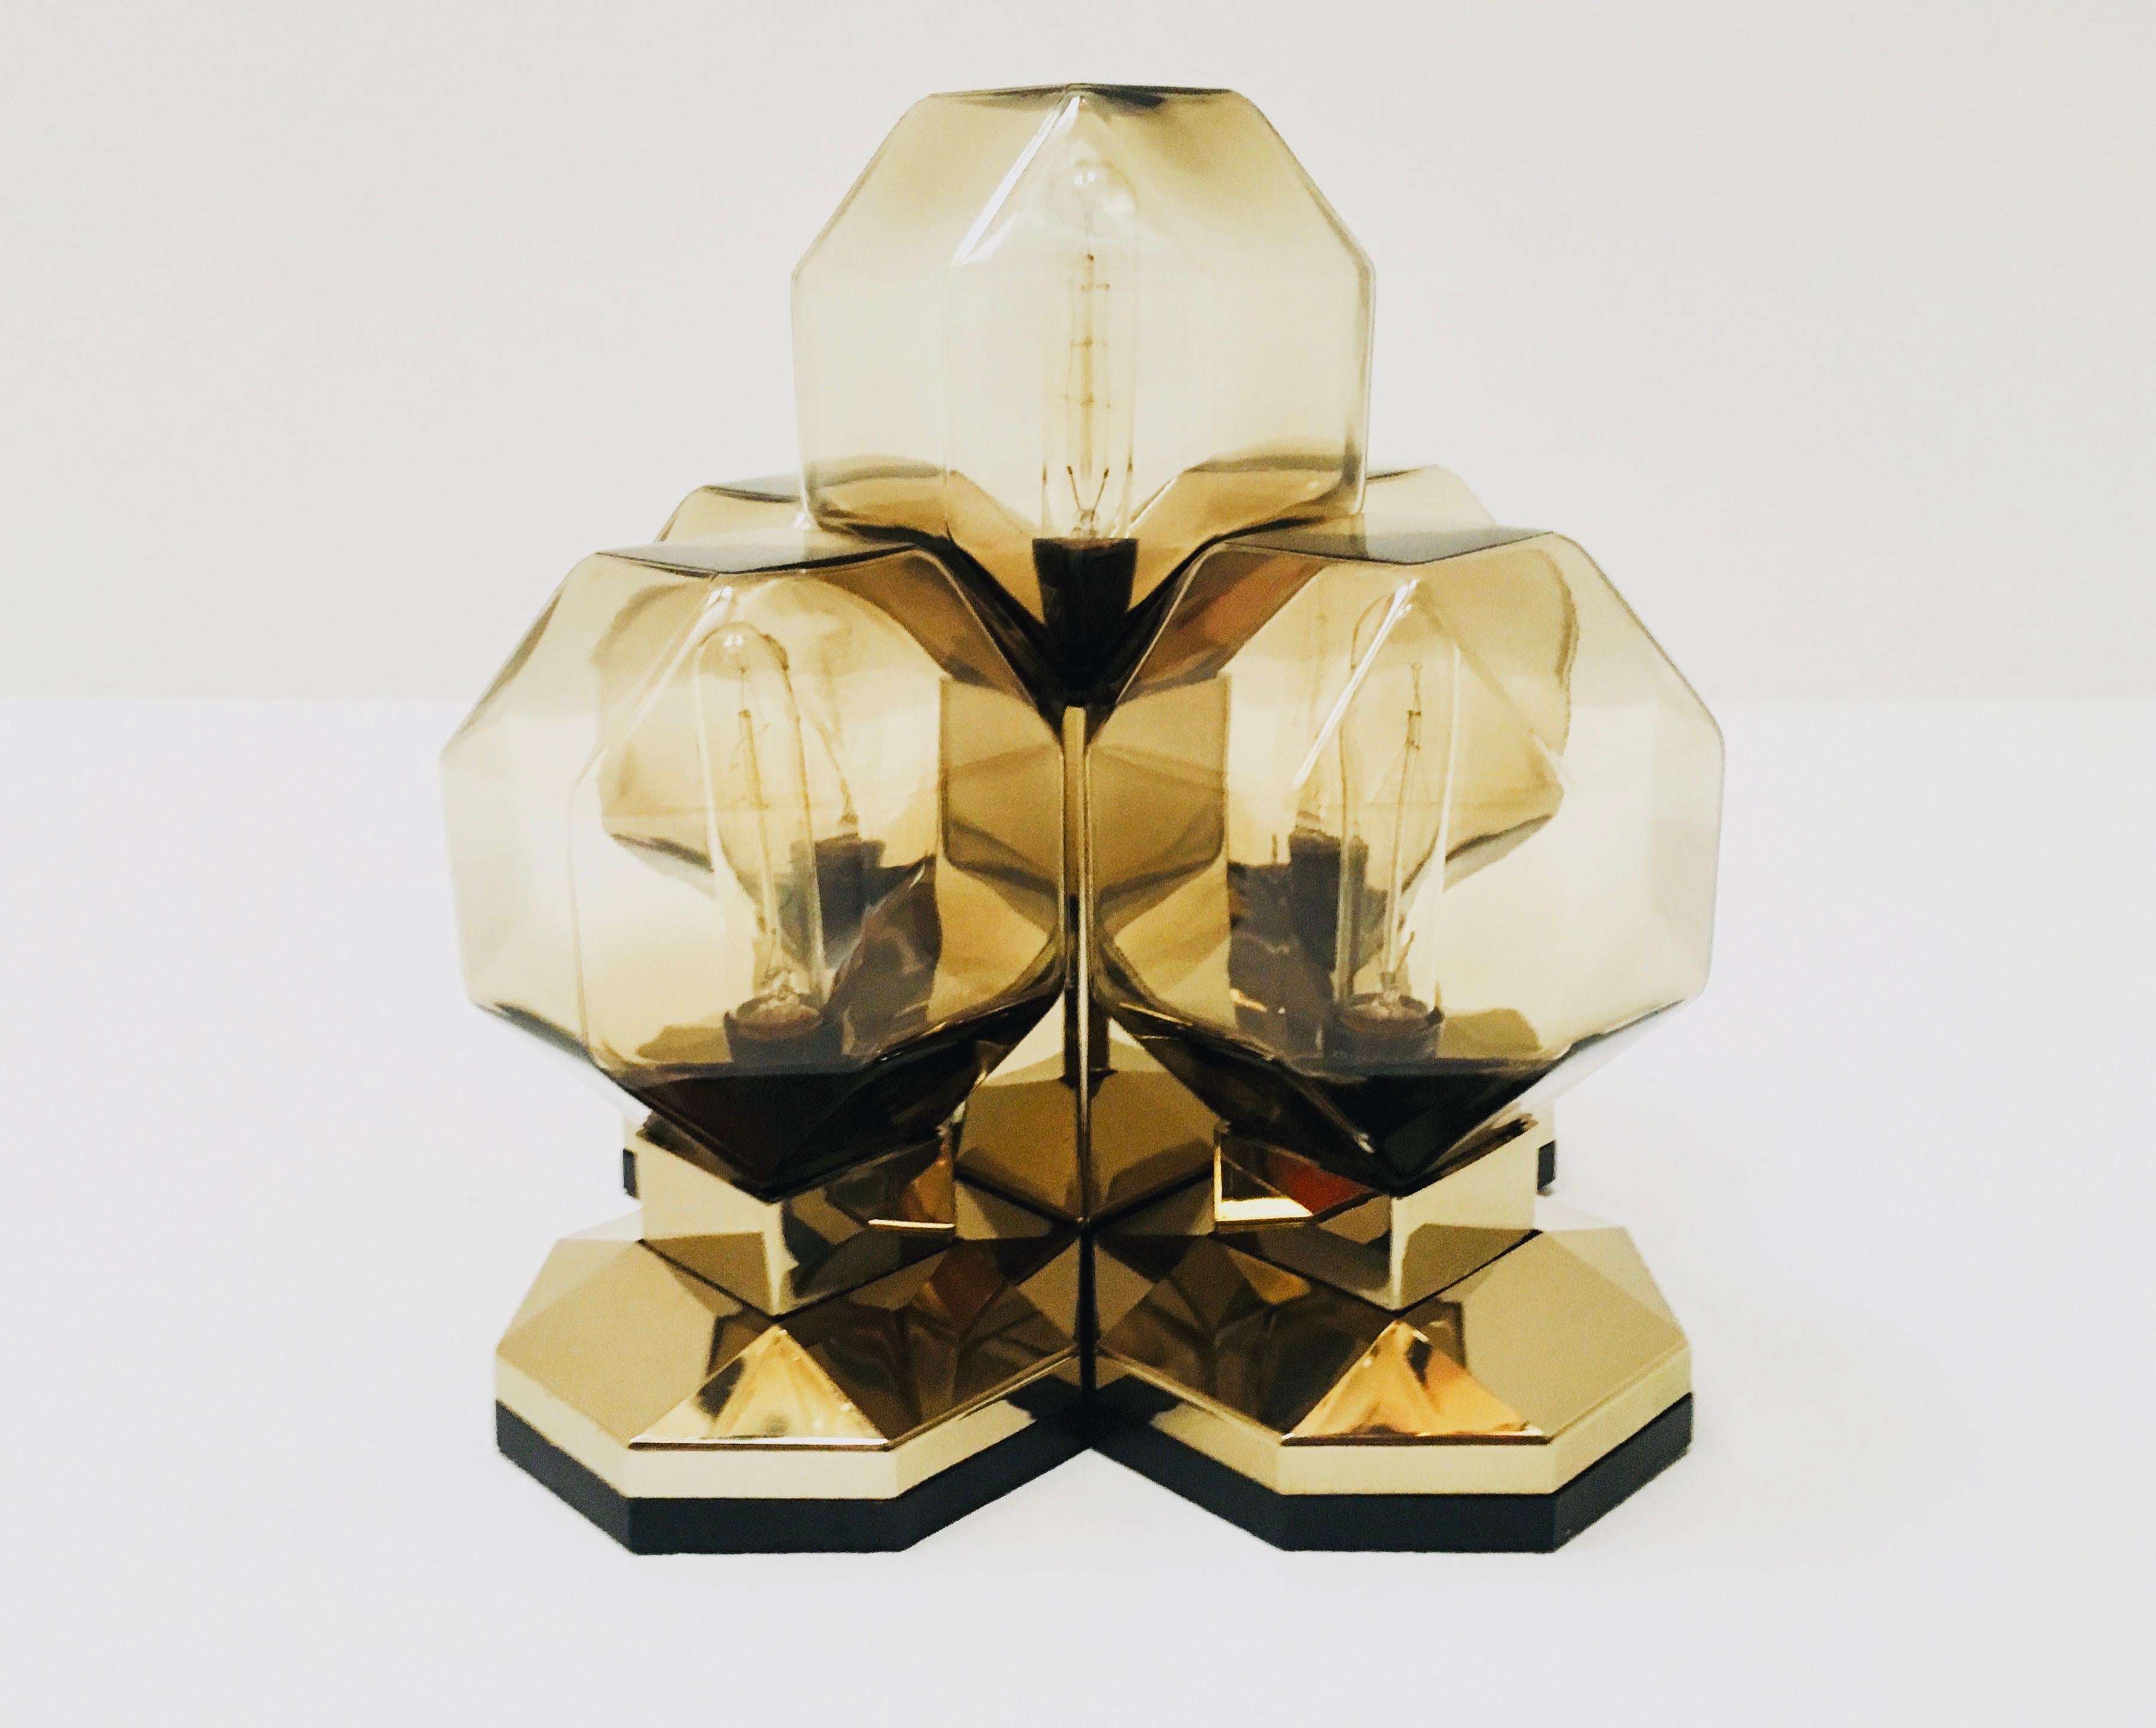 Extremely impressive module lamp from the 1970s.
Very unusual design and a real highlight for every room.
The lighting effect of the lamp is extremely beautiful and sparkling.
Very high quality processing.
This version in gold with the smoked